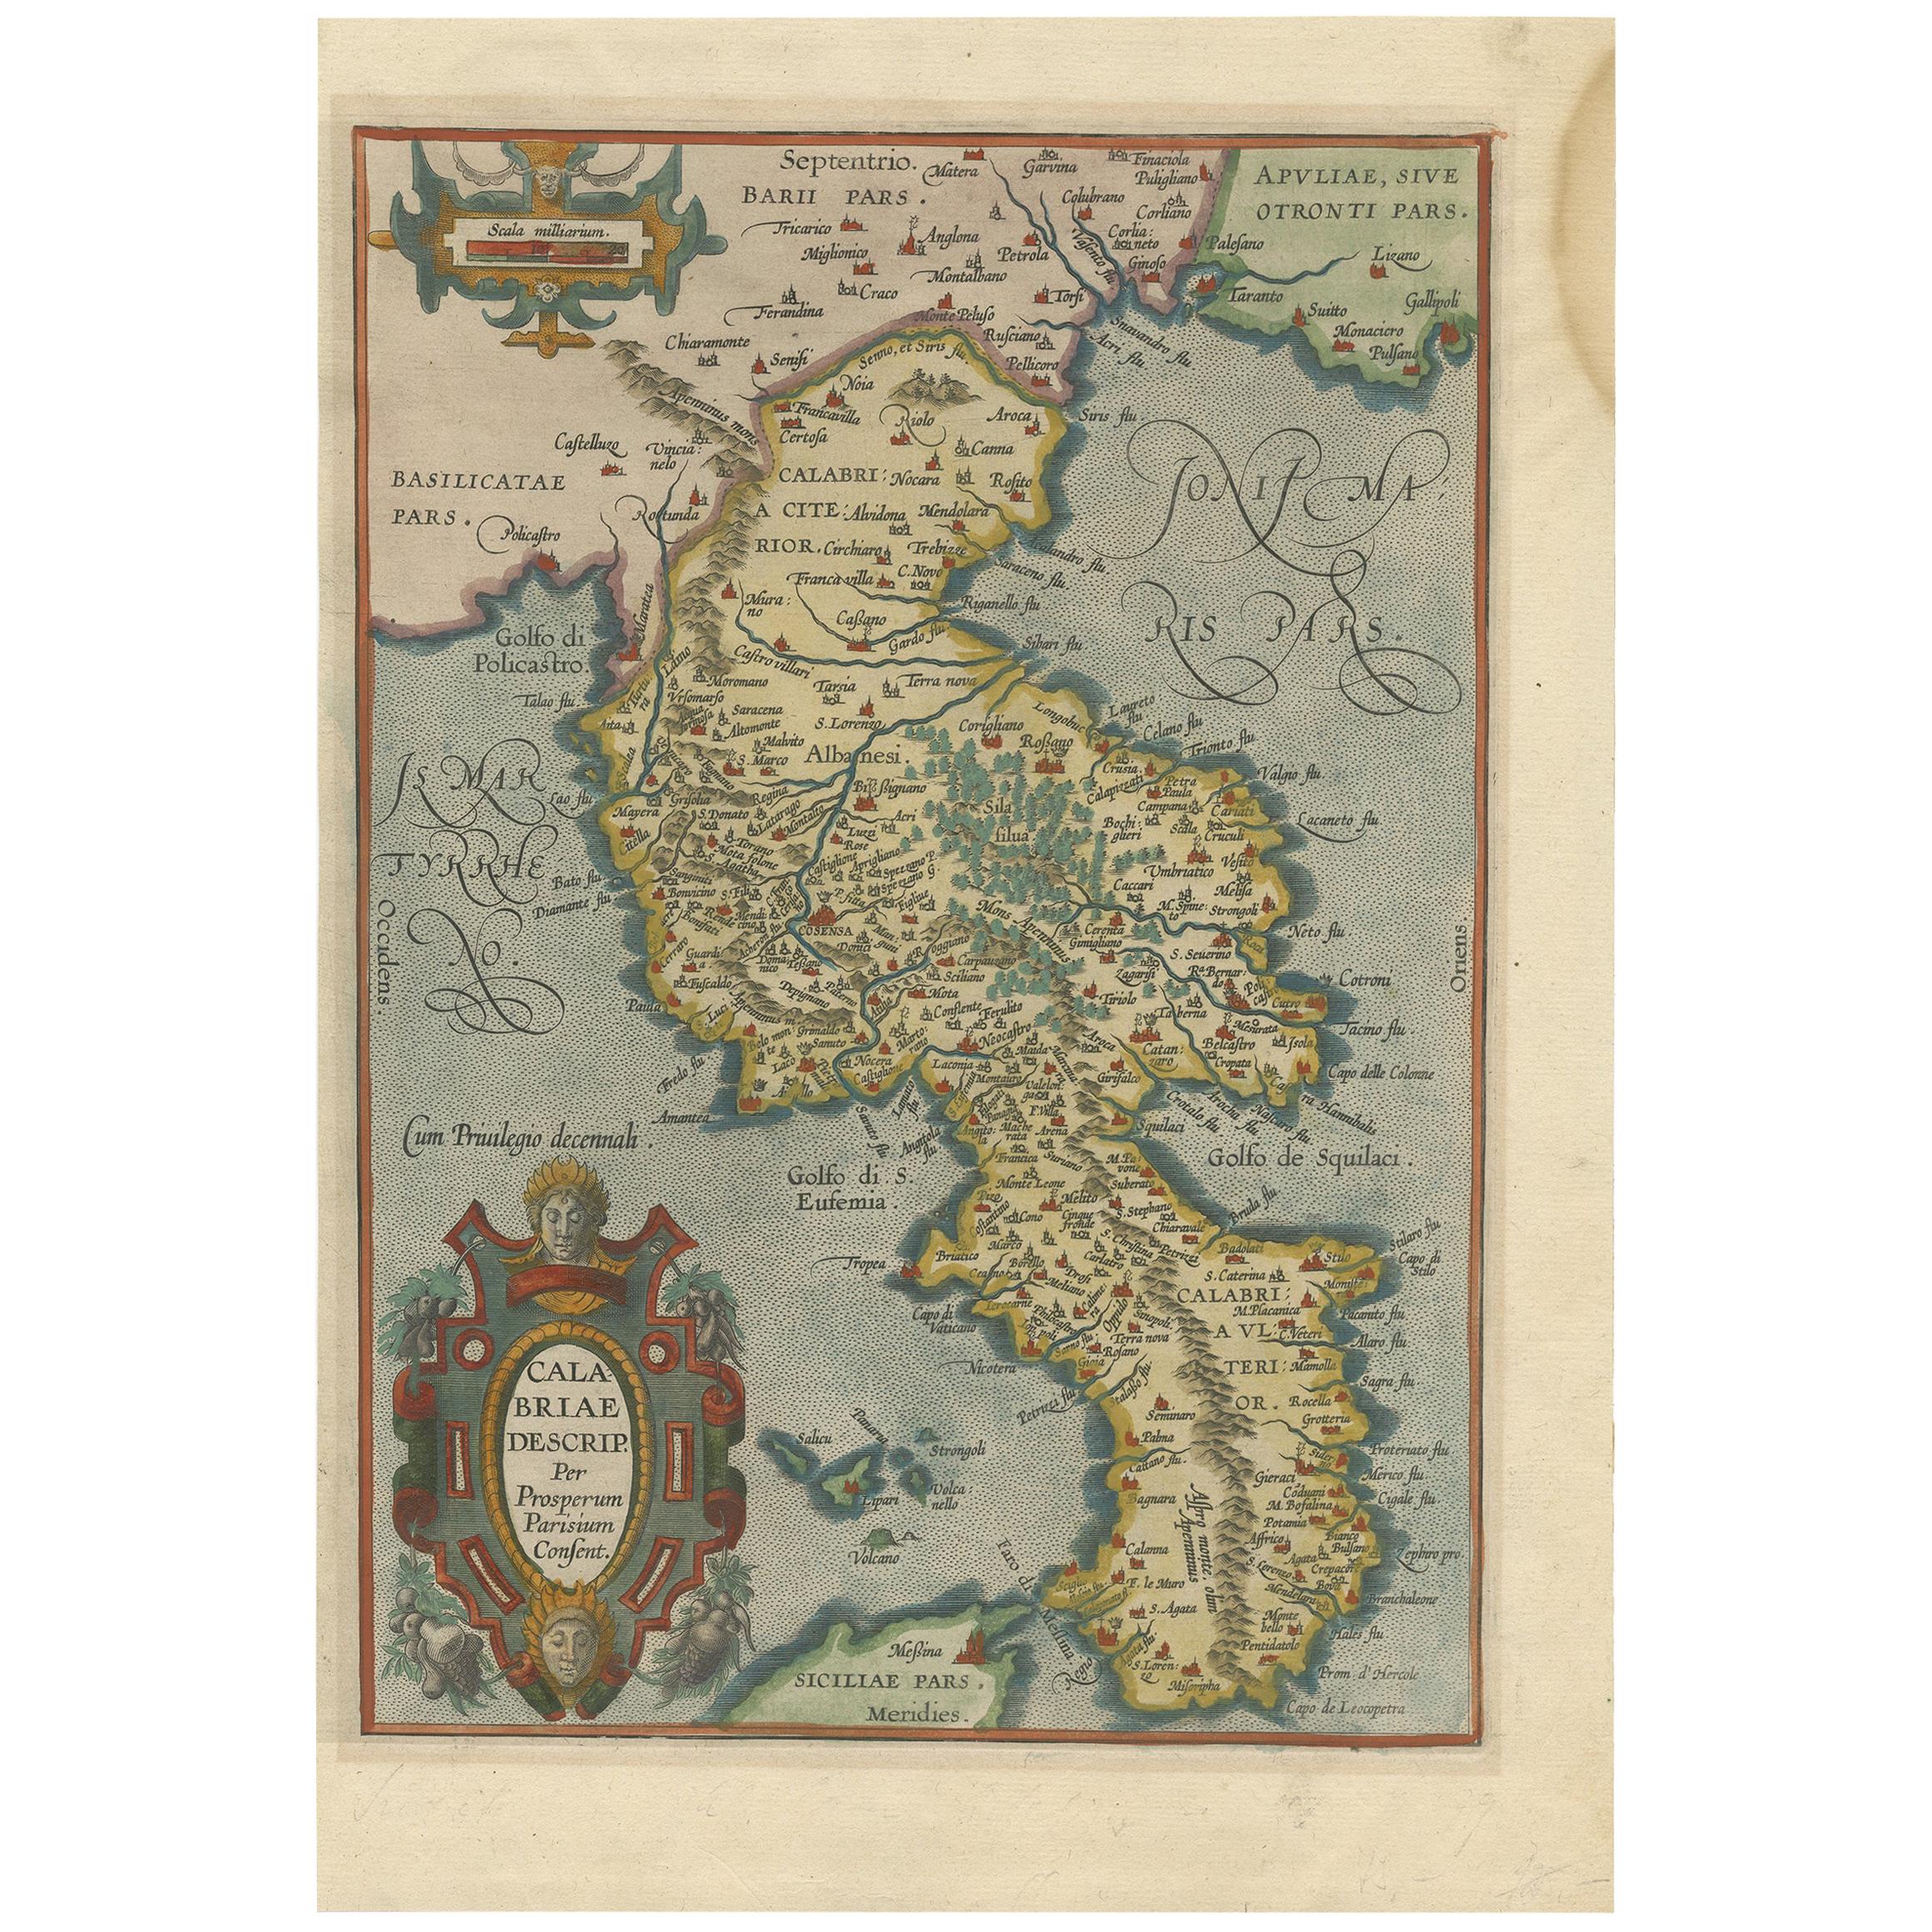 Antique Map of the Region of Calabria by Ortelius, 1612